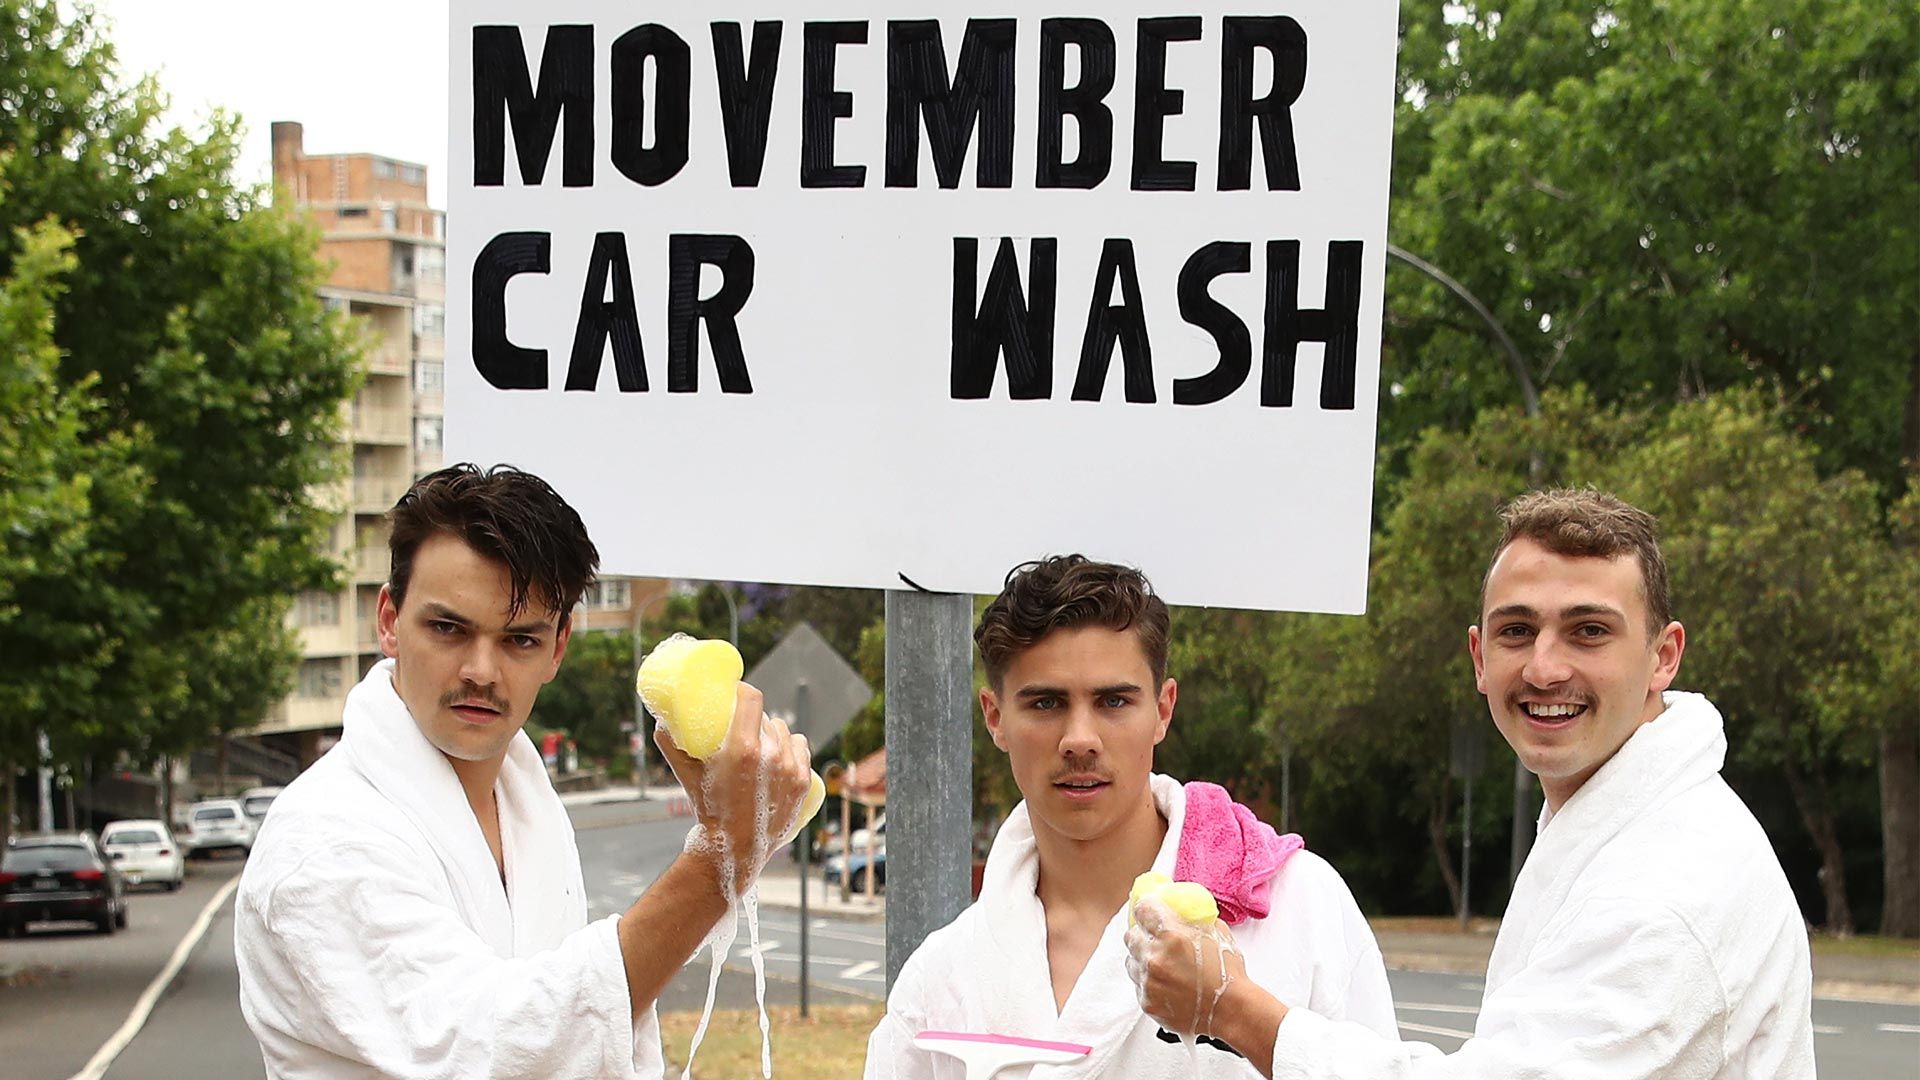 The Movember Car Wash is open for business